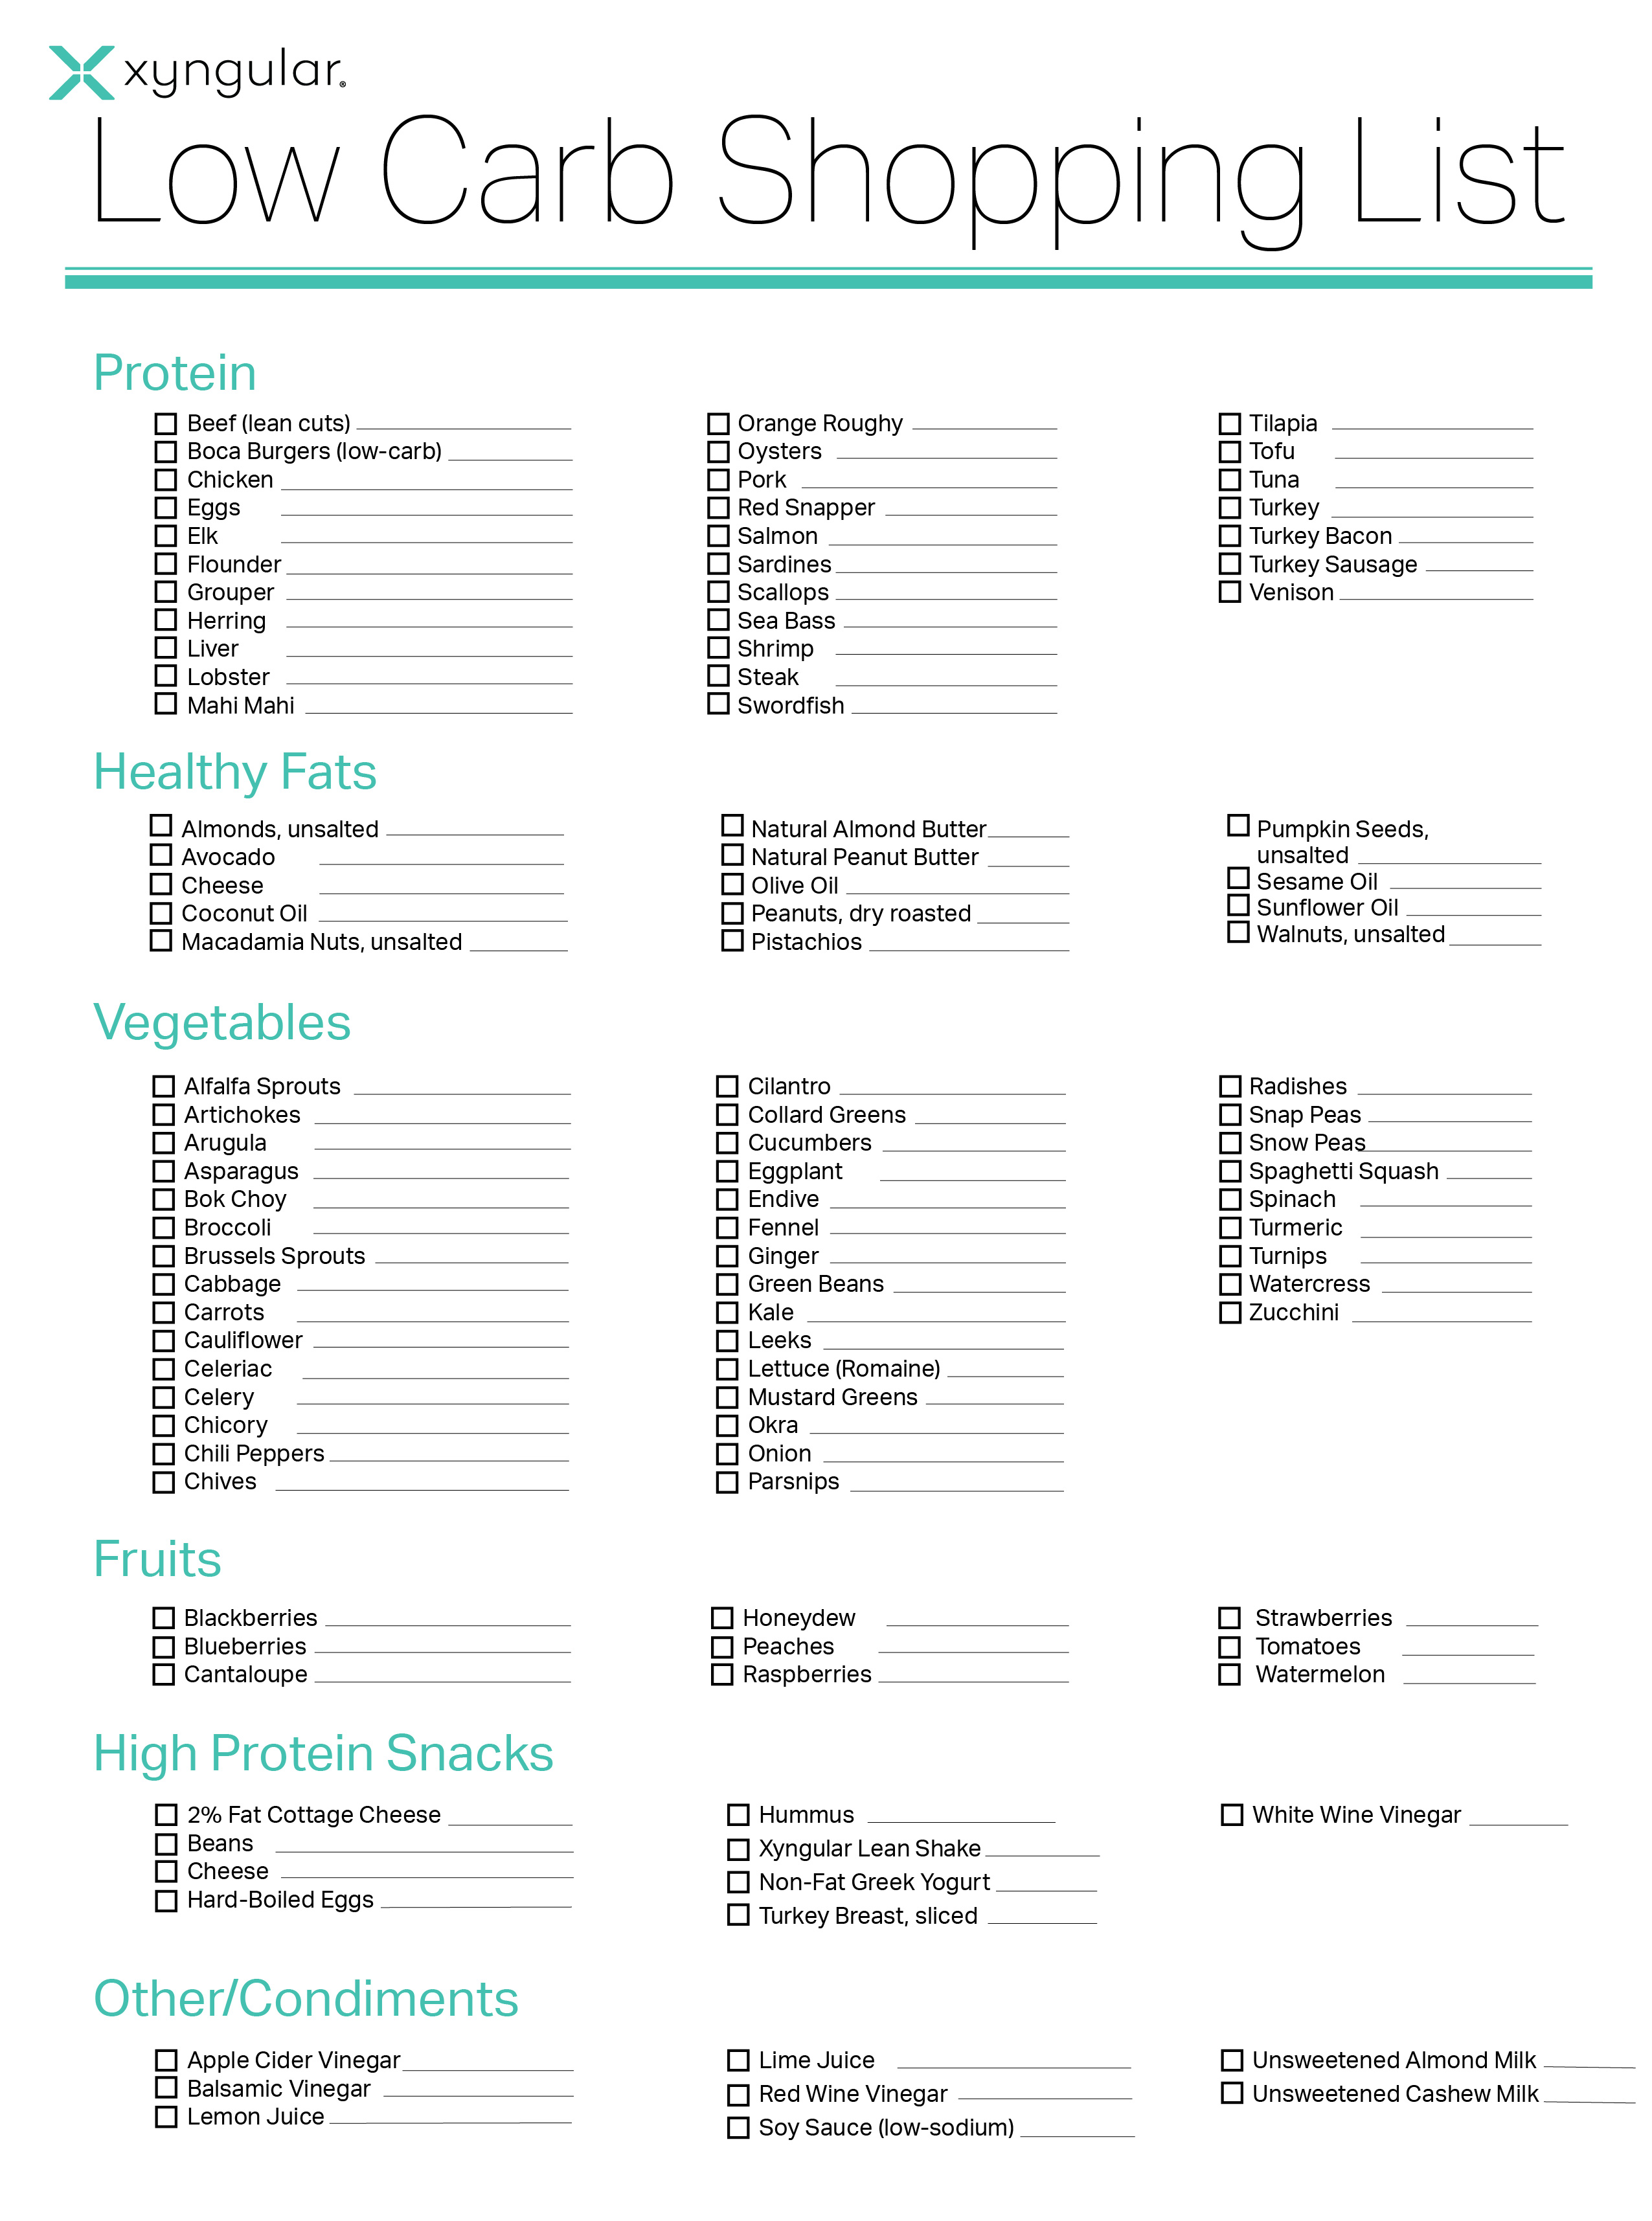 The Ultimate Low Carb Grocery List! Over 50 Low Carb Approved Foods!